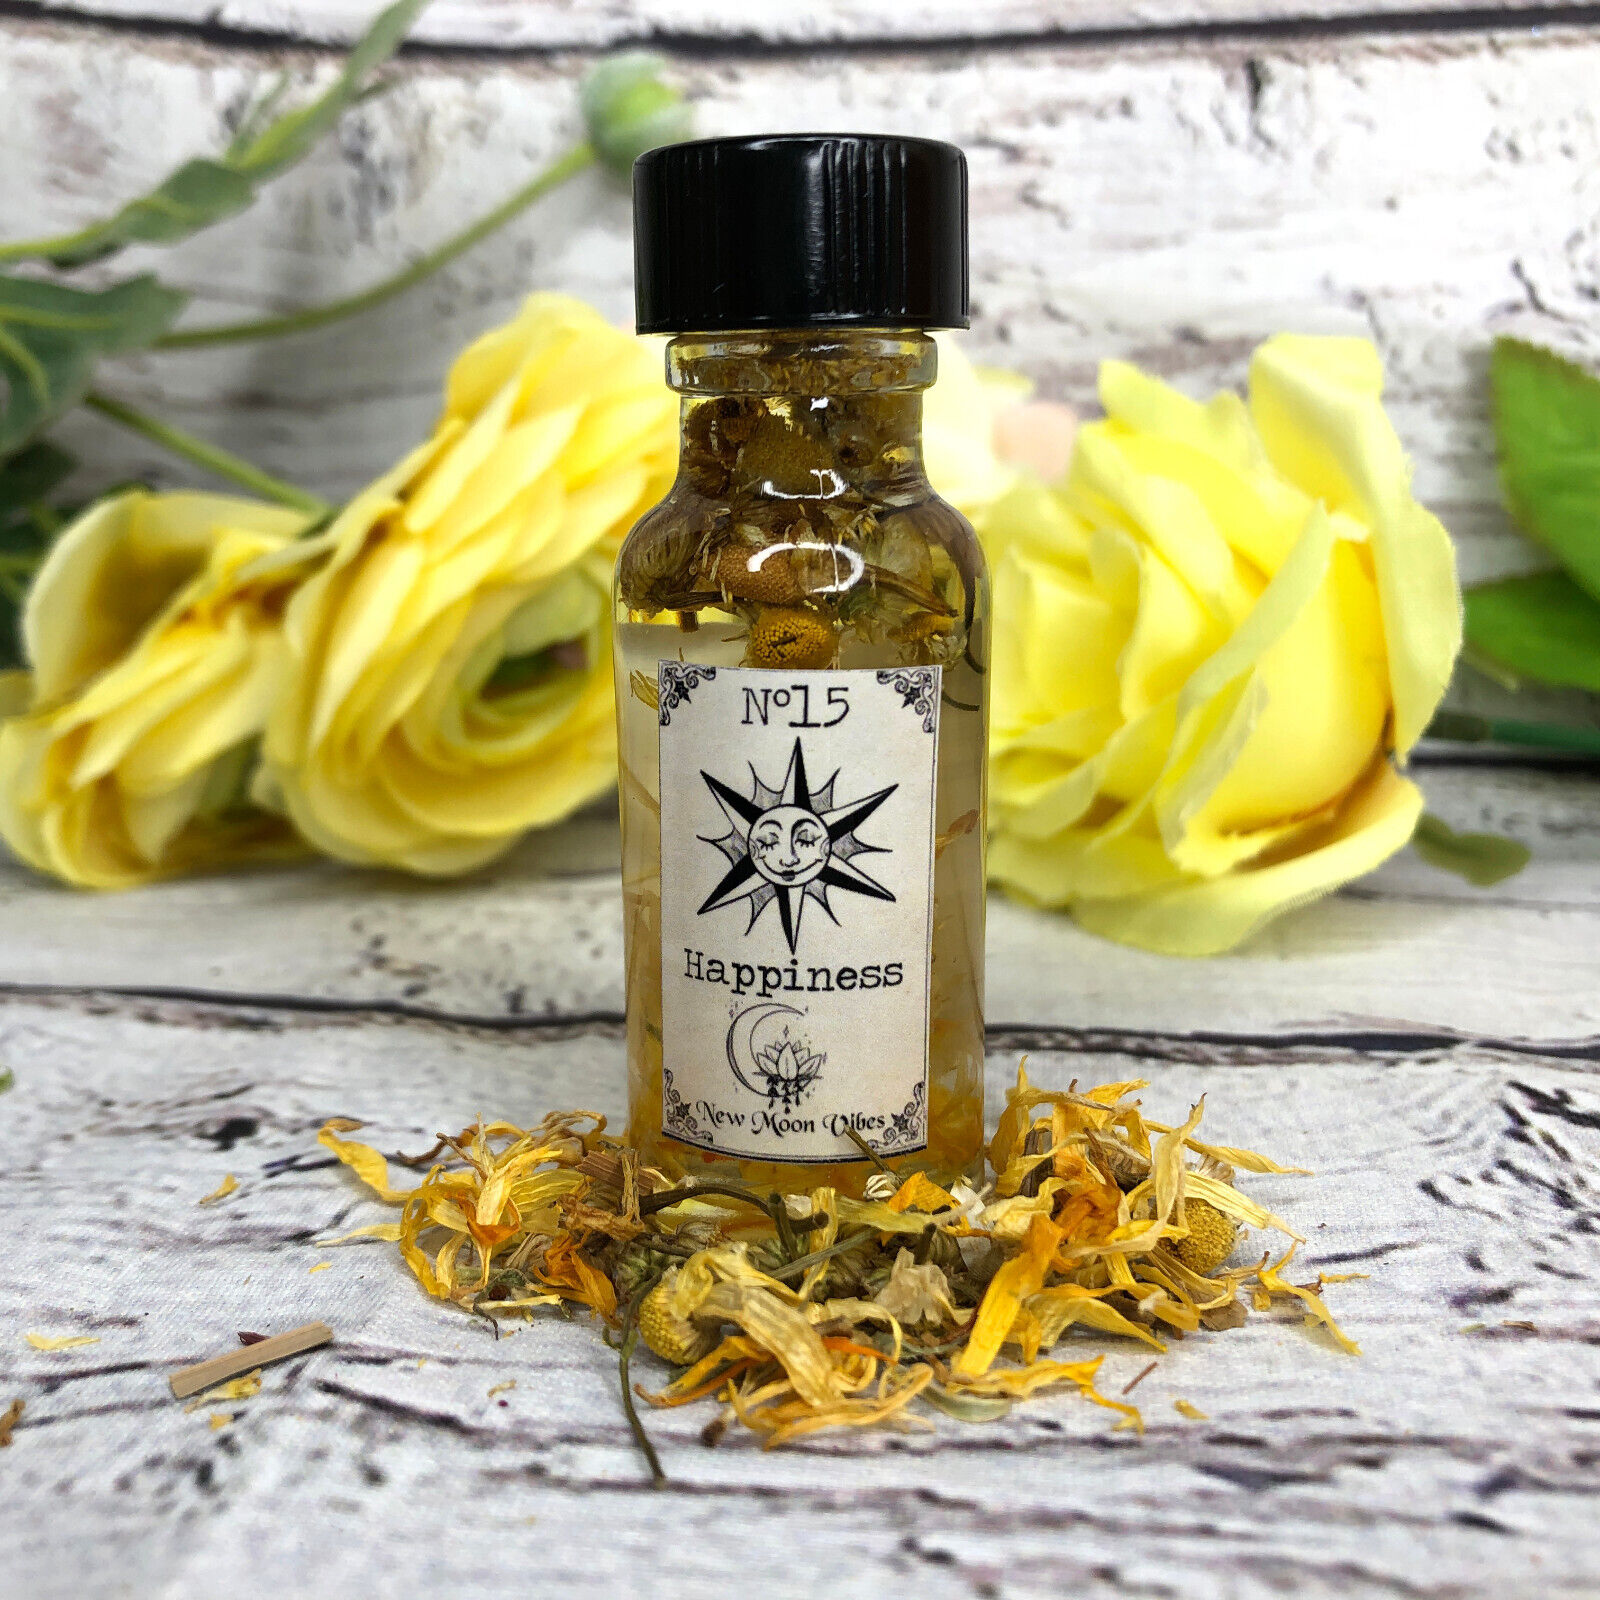 Happiness Happy Conjure Oil Wiccan Pagan Intention Spell Draw Joy Positivity